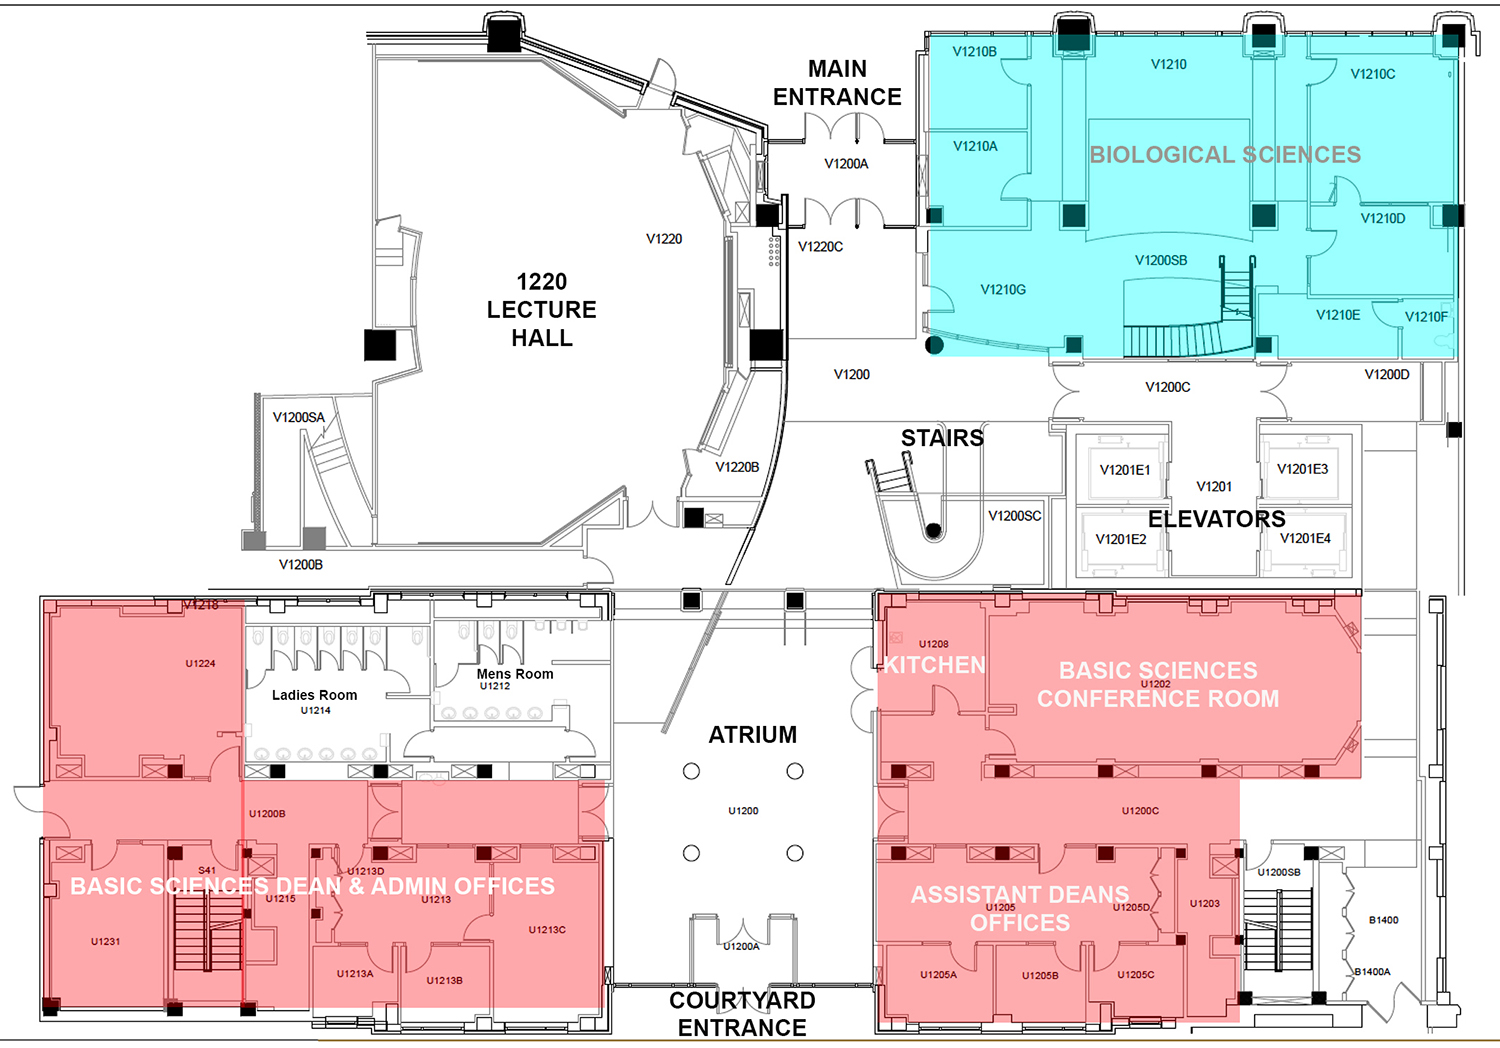 Layout of the first floor of MRBIII, showing the location of several areas, including the 1220 lecture hall, atrium, stairs, elevators, etc. The top right of the image, across the way from 1220 and next to the main entrance, there is a section shaded in cyan and is labeled "Biological Sciences." The bottom left is the U1200 suite, colored in red, and is the Basic Sciecnes Dean & Admin Offices. Across the atrium and on the bottom right of the image is the Basic Sciences conference room, the kitchen, and the offices of the assistant deans. This region is also shaded red.